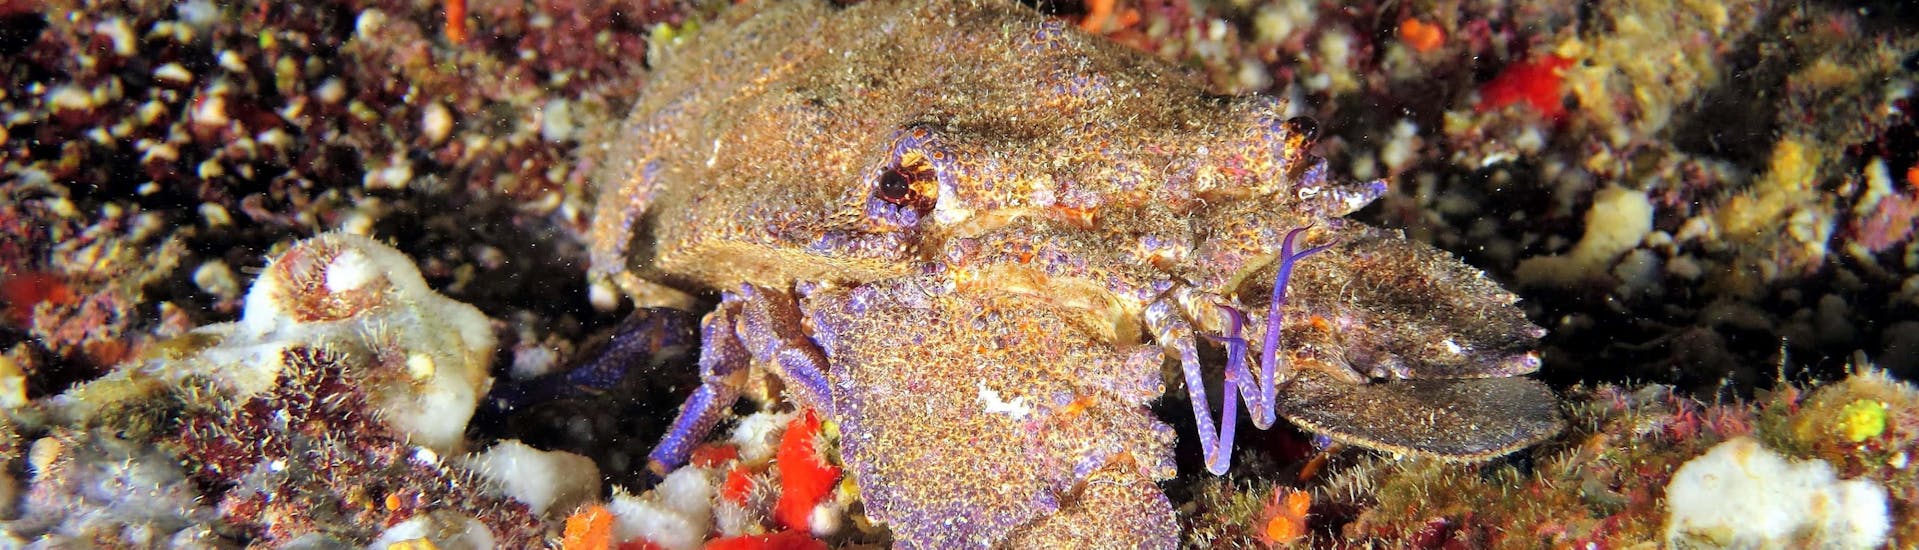 A slipper lobster which can be observed in its natural habitat during the Free Diving for Beginners in Saint Paul's Bay with Octopus Garden.